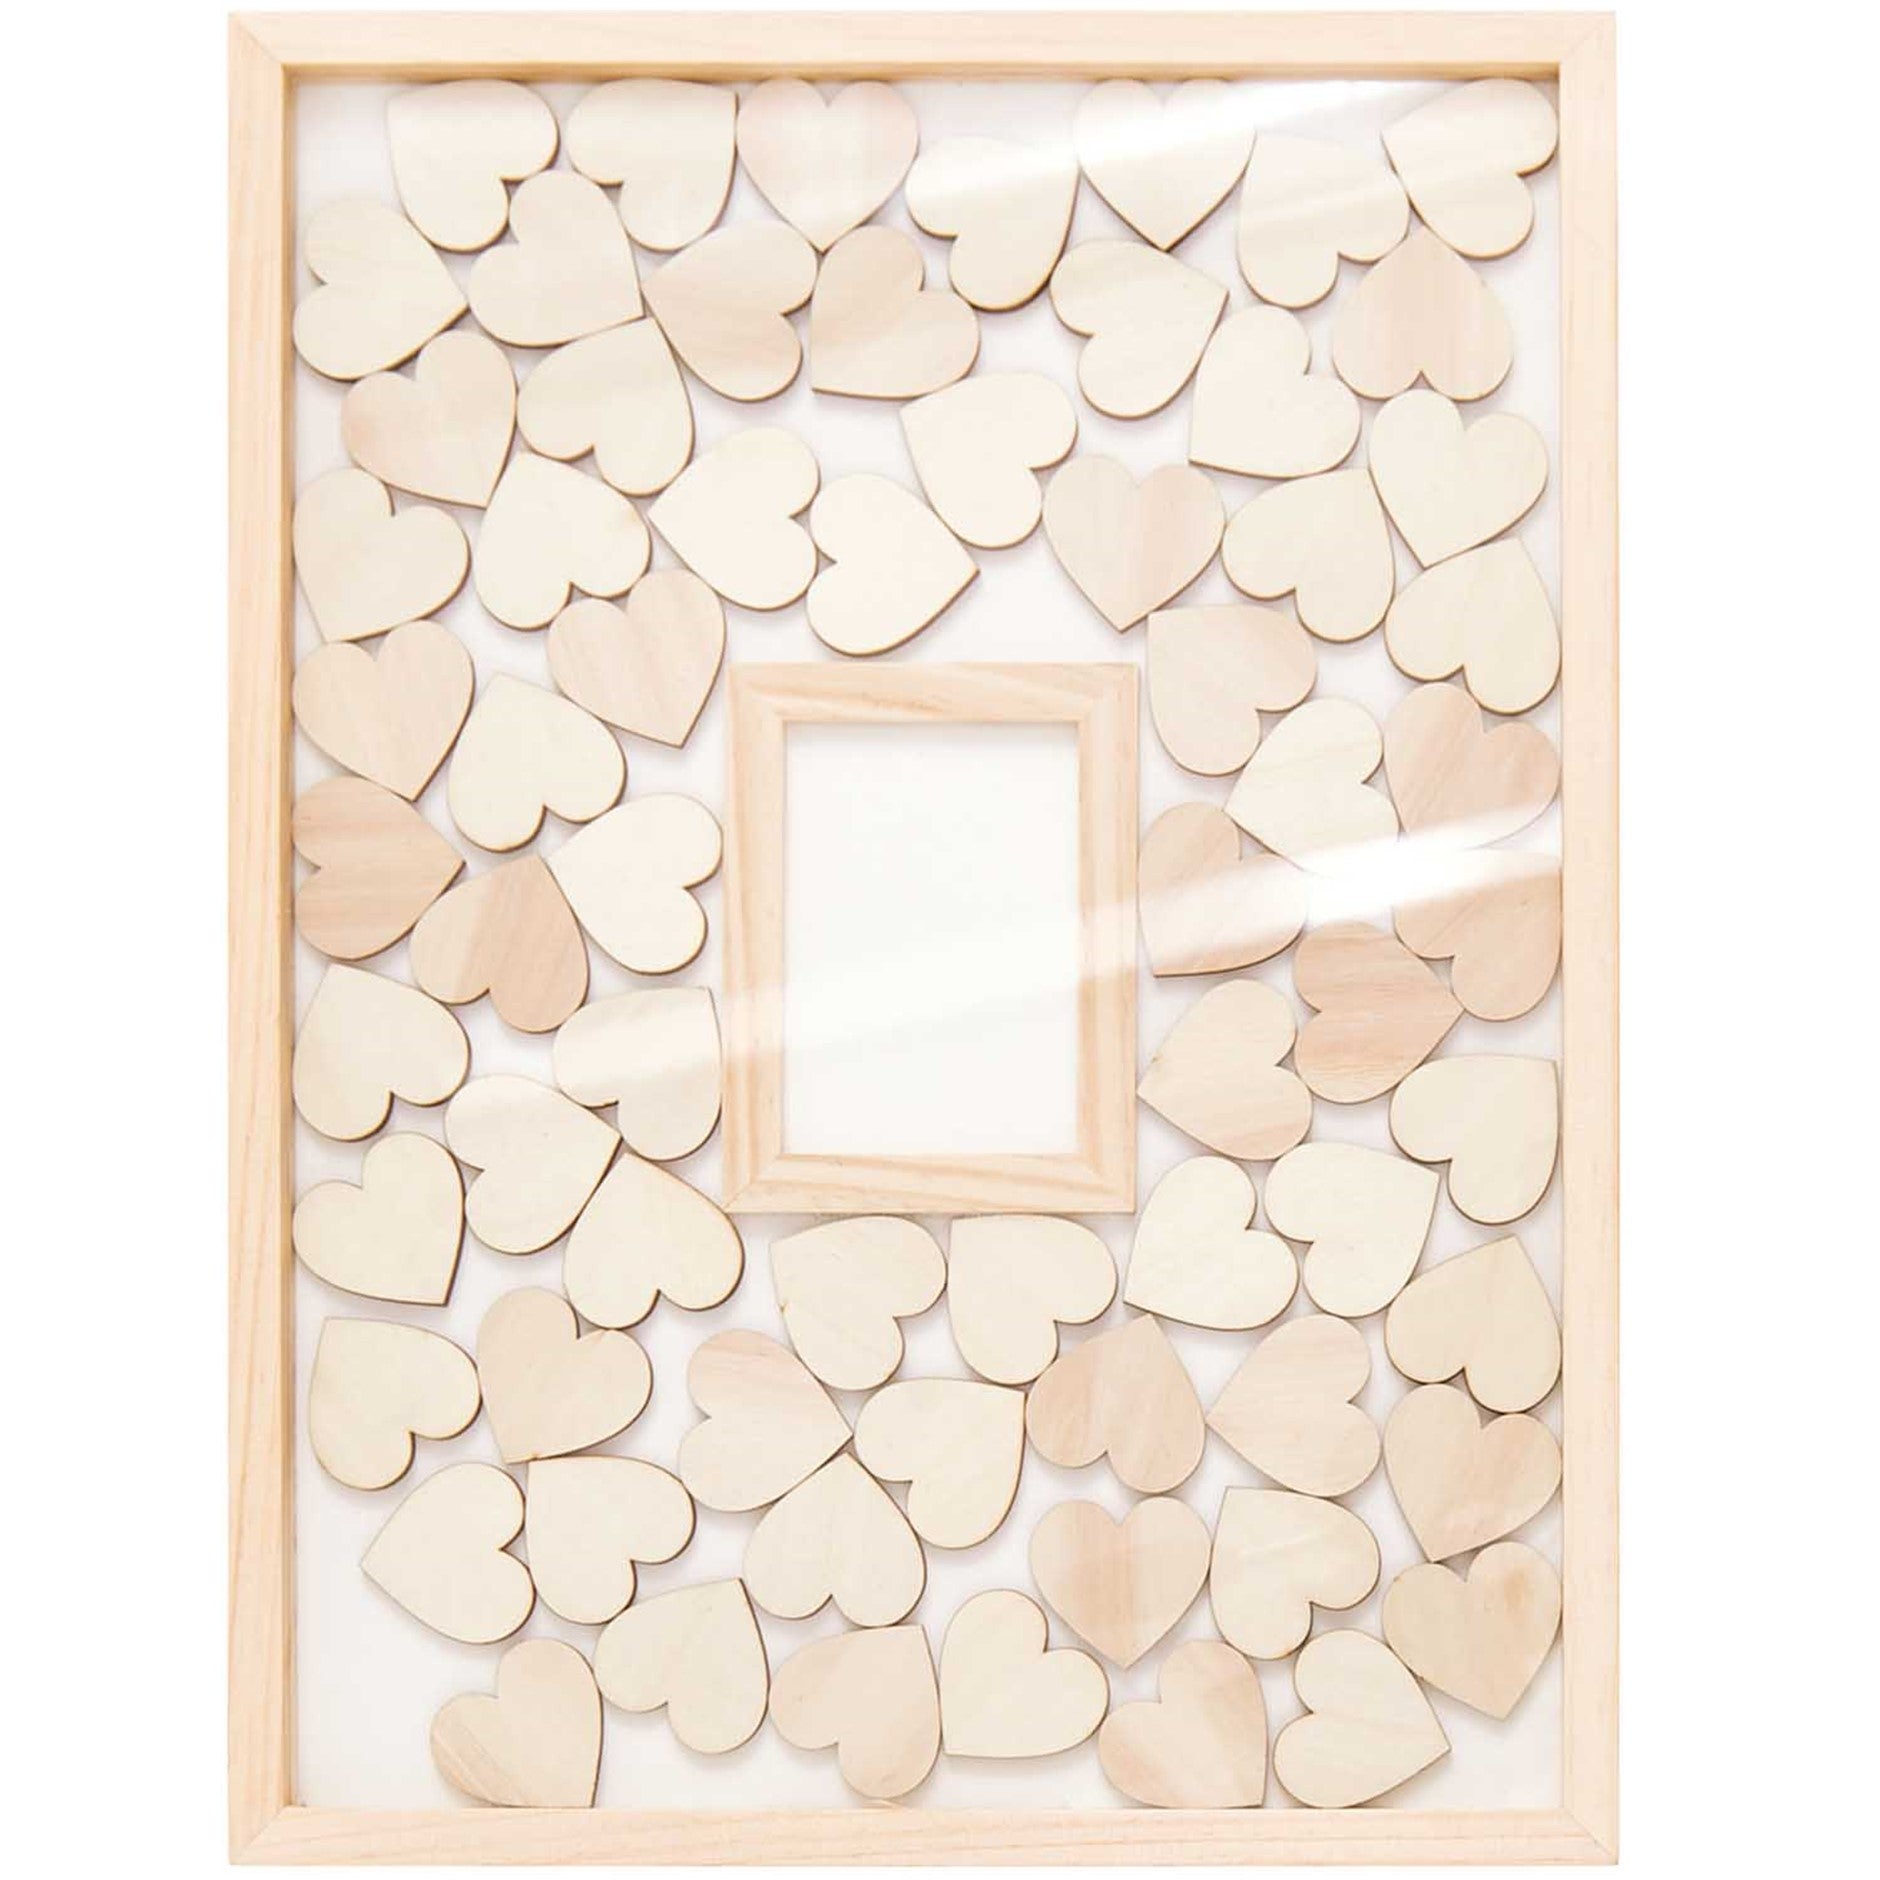 Celebration Drop Top Box Frame with 70 Wooden Hearts